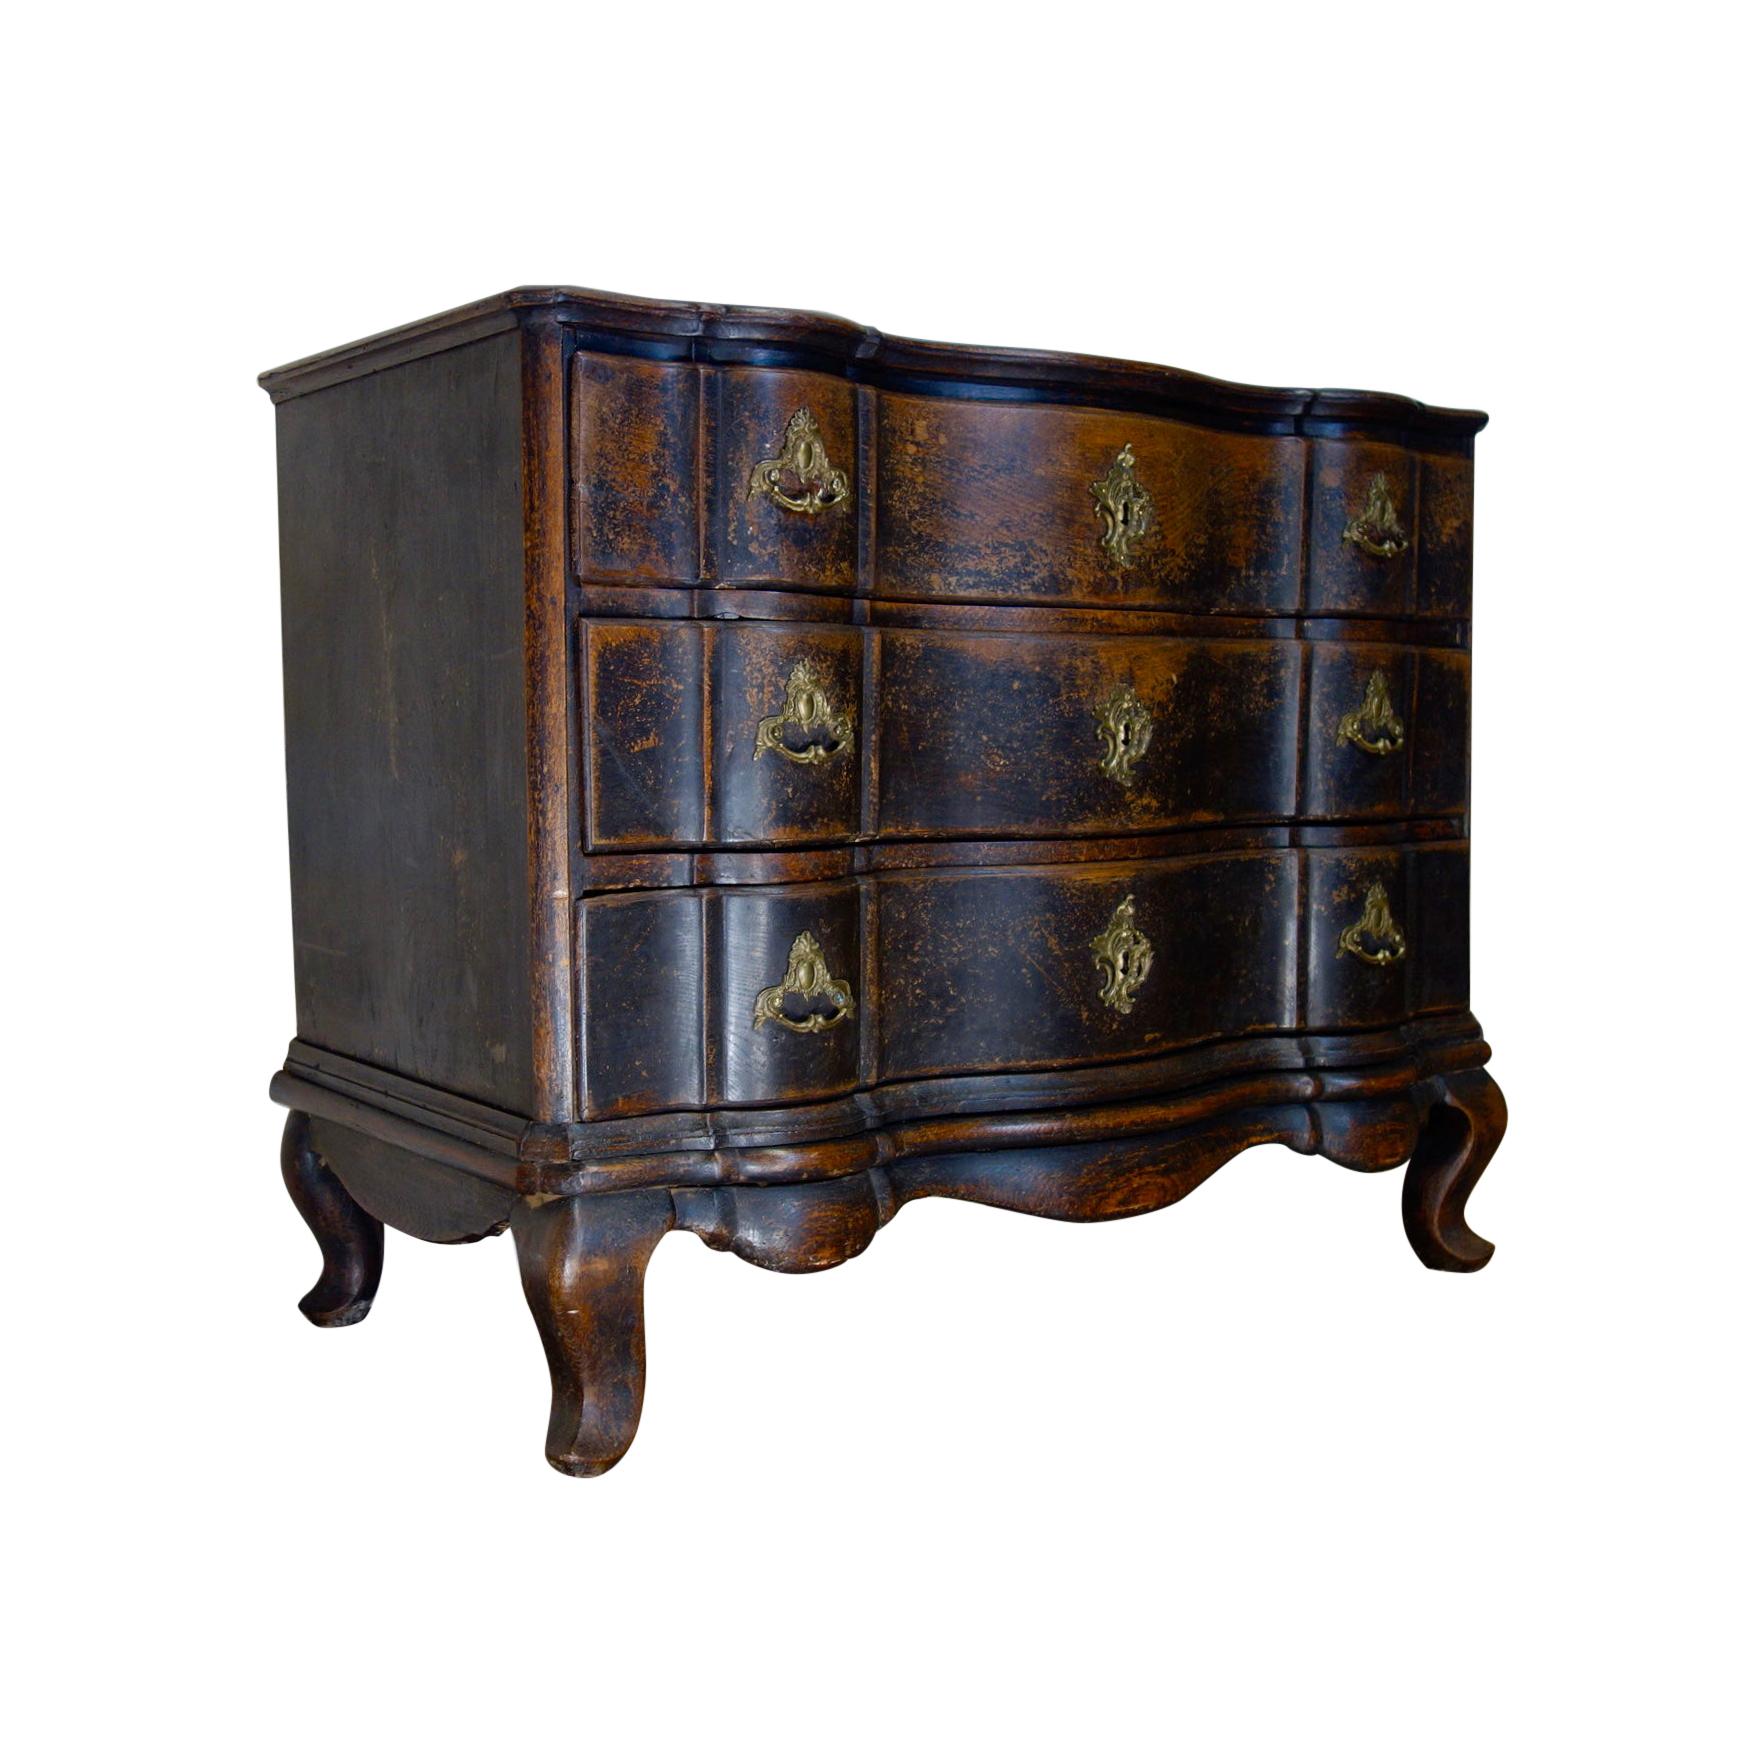 A Large 18th Century Danish Baroque Ebonized Commode Painted Chest of Drawers